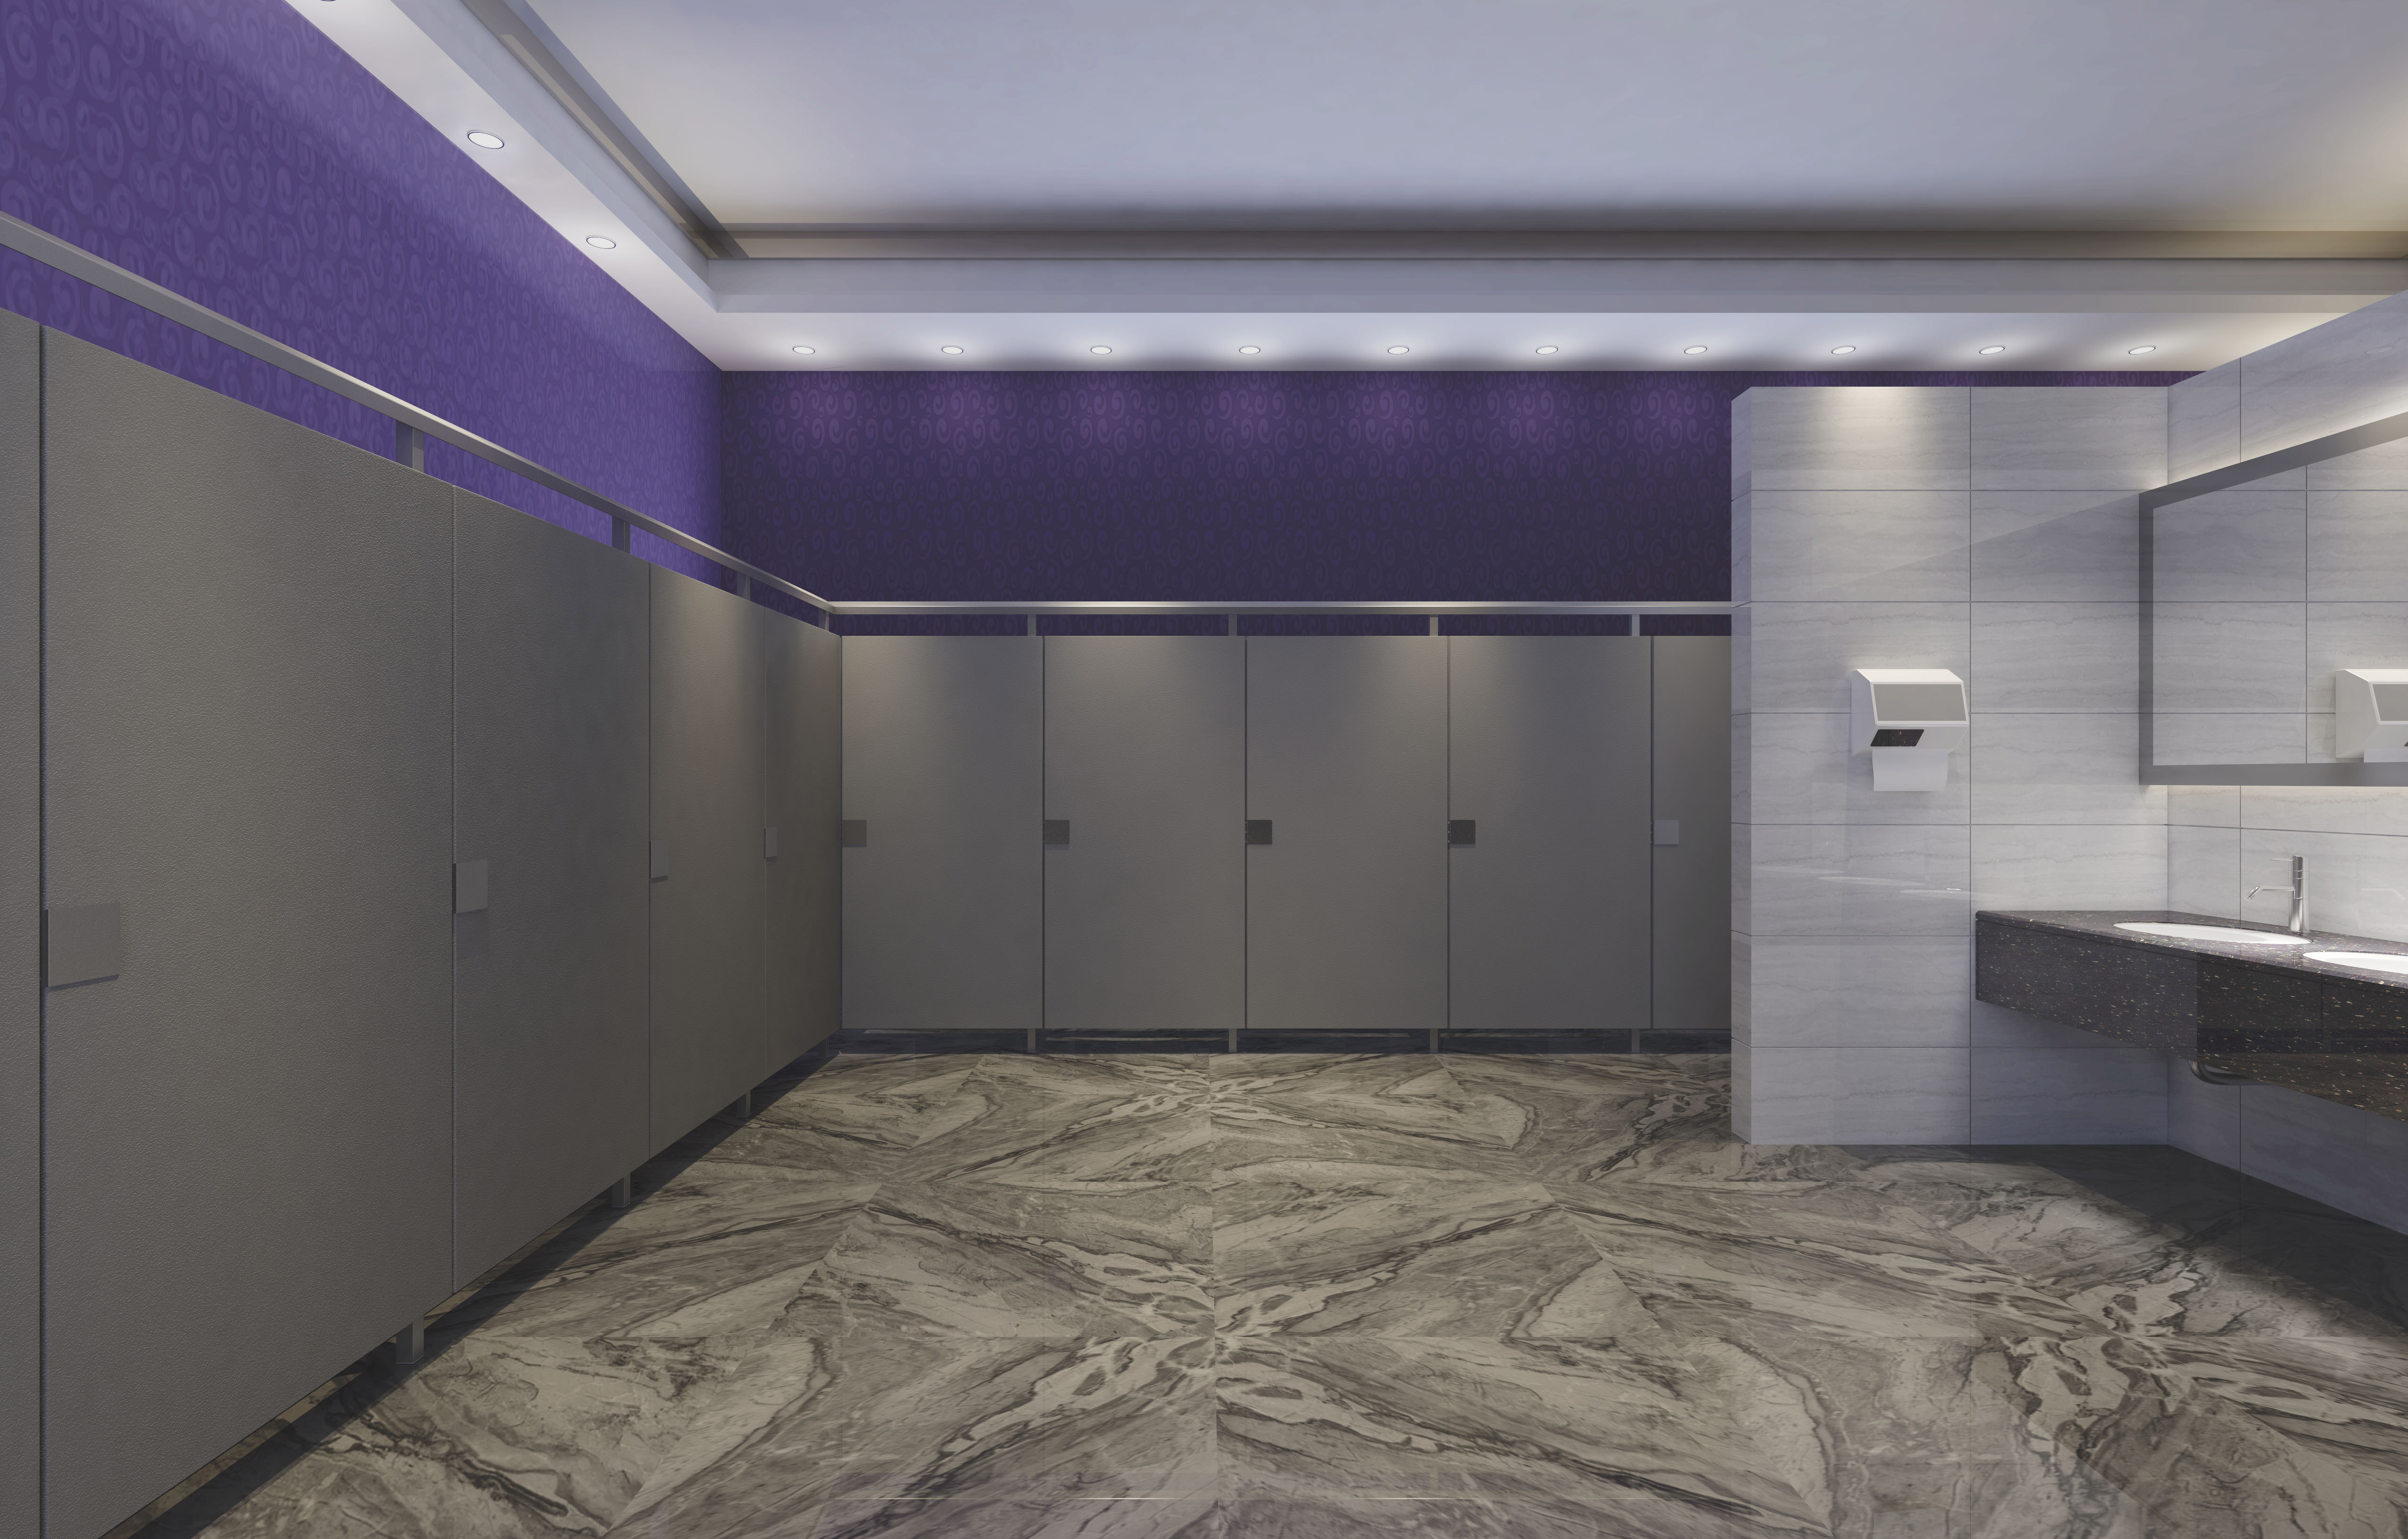 Eclipse has the clean, ultra-modern looks to fit any contemporary restroom design.